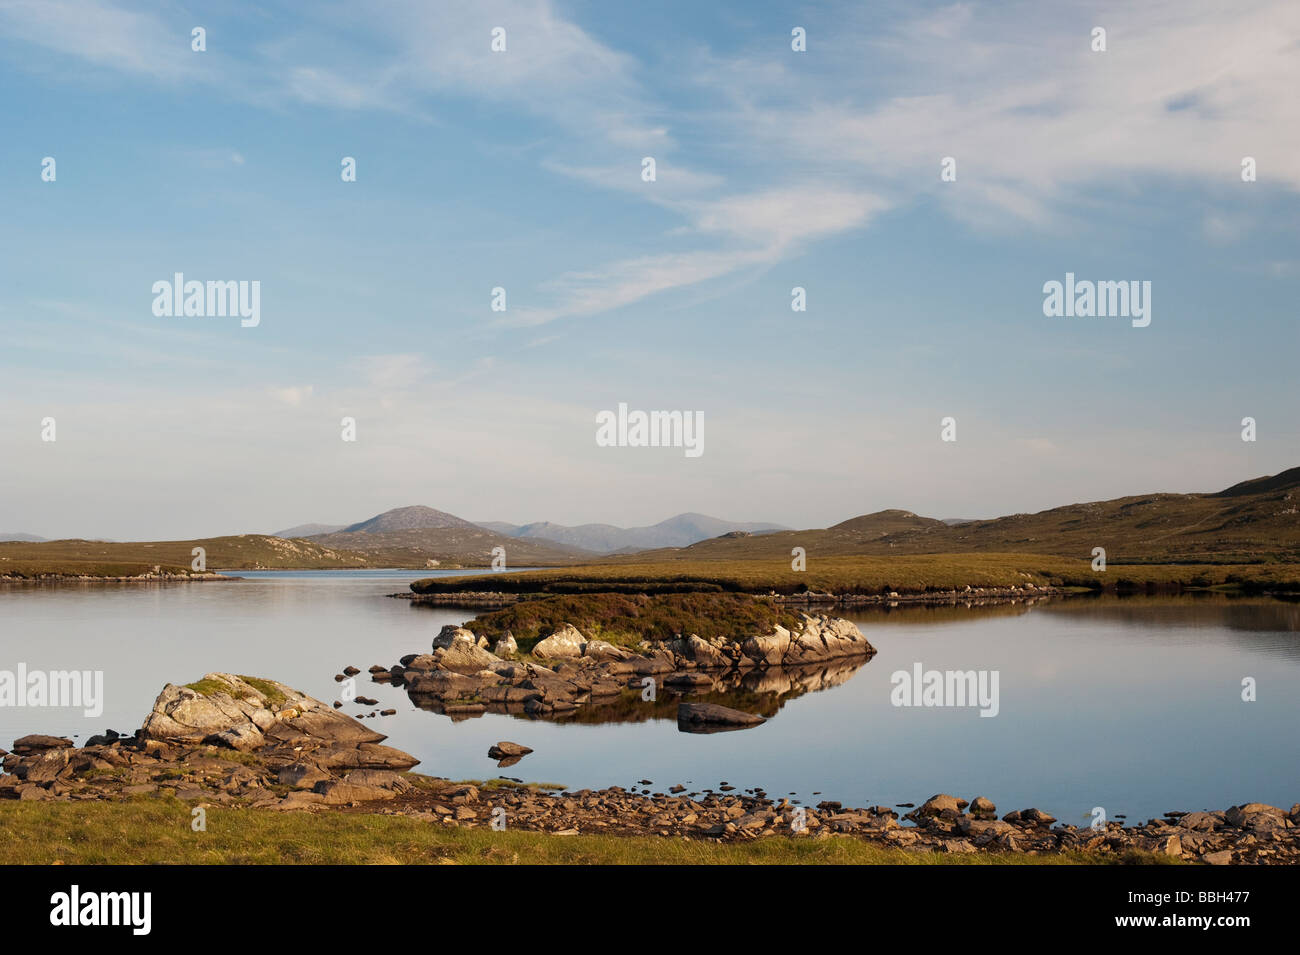 Evening light on a loch, Isle of Lewis, Outer Hebrides, Scotland Stock Photo